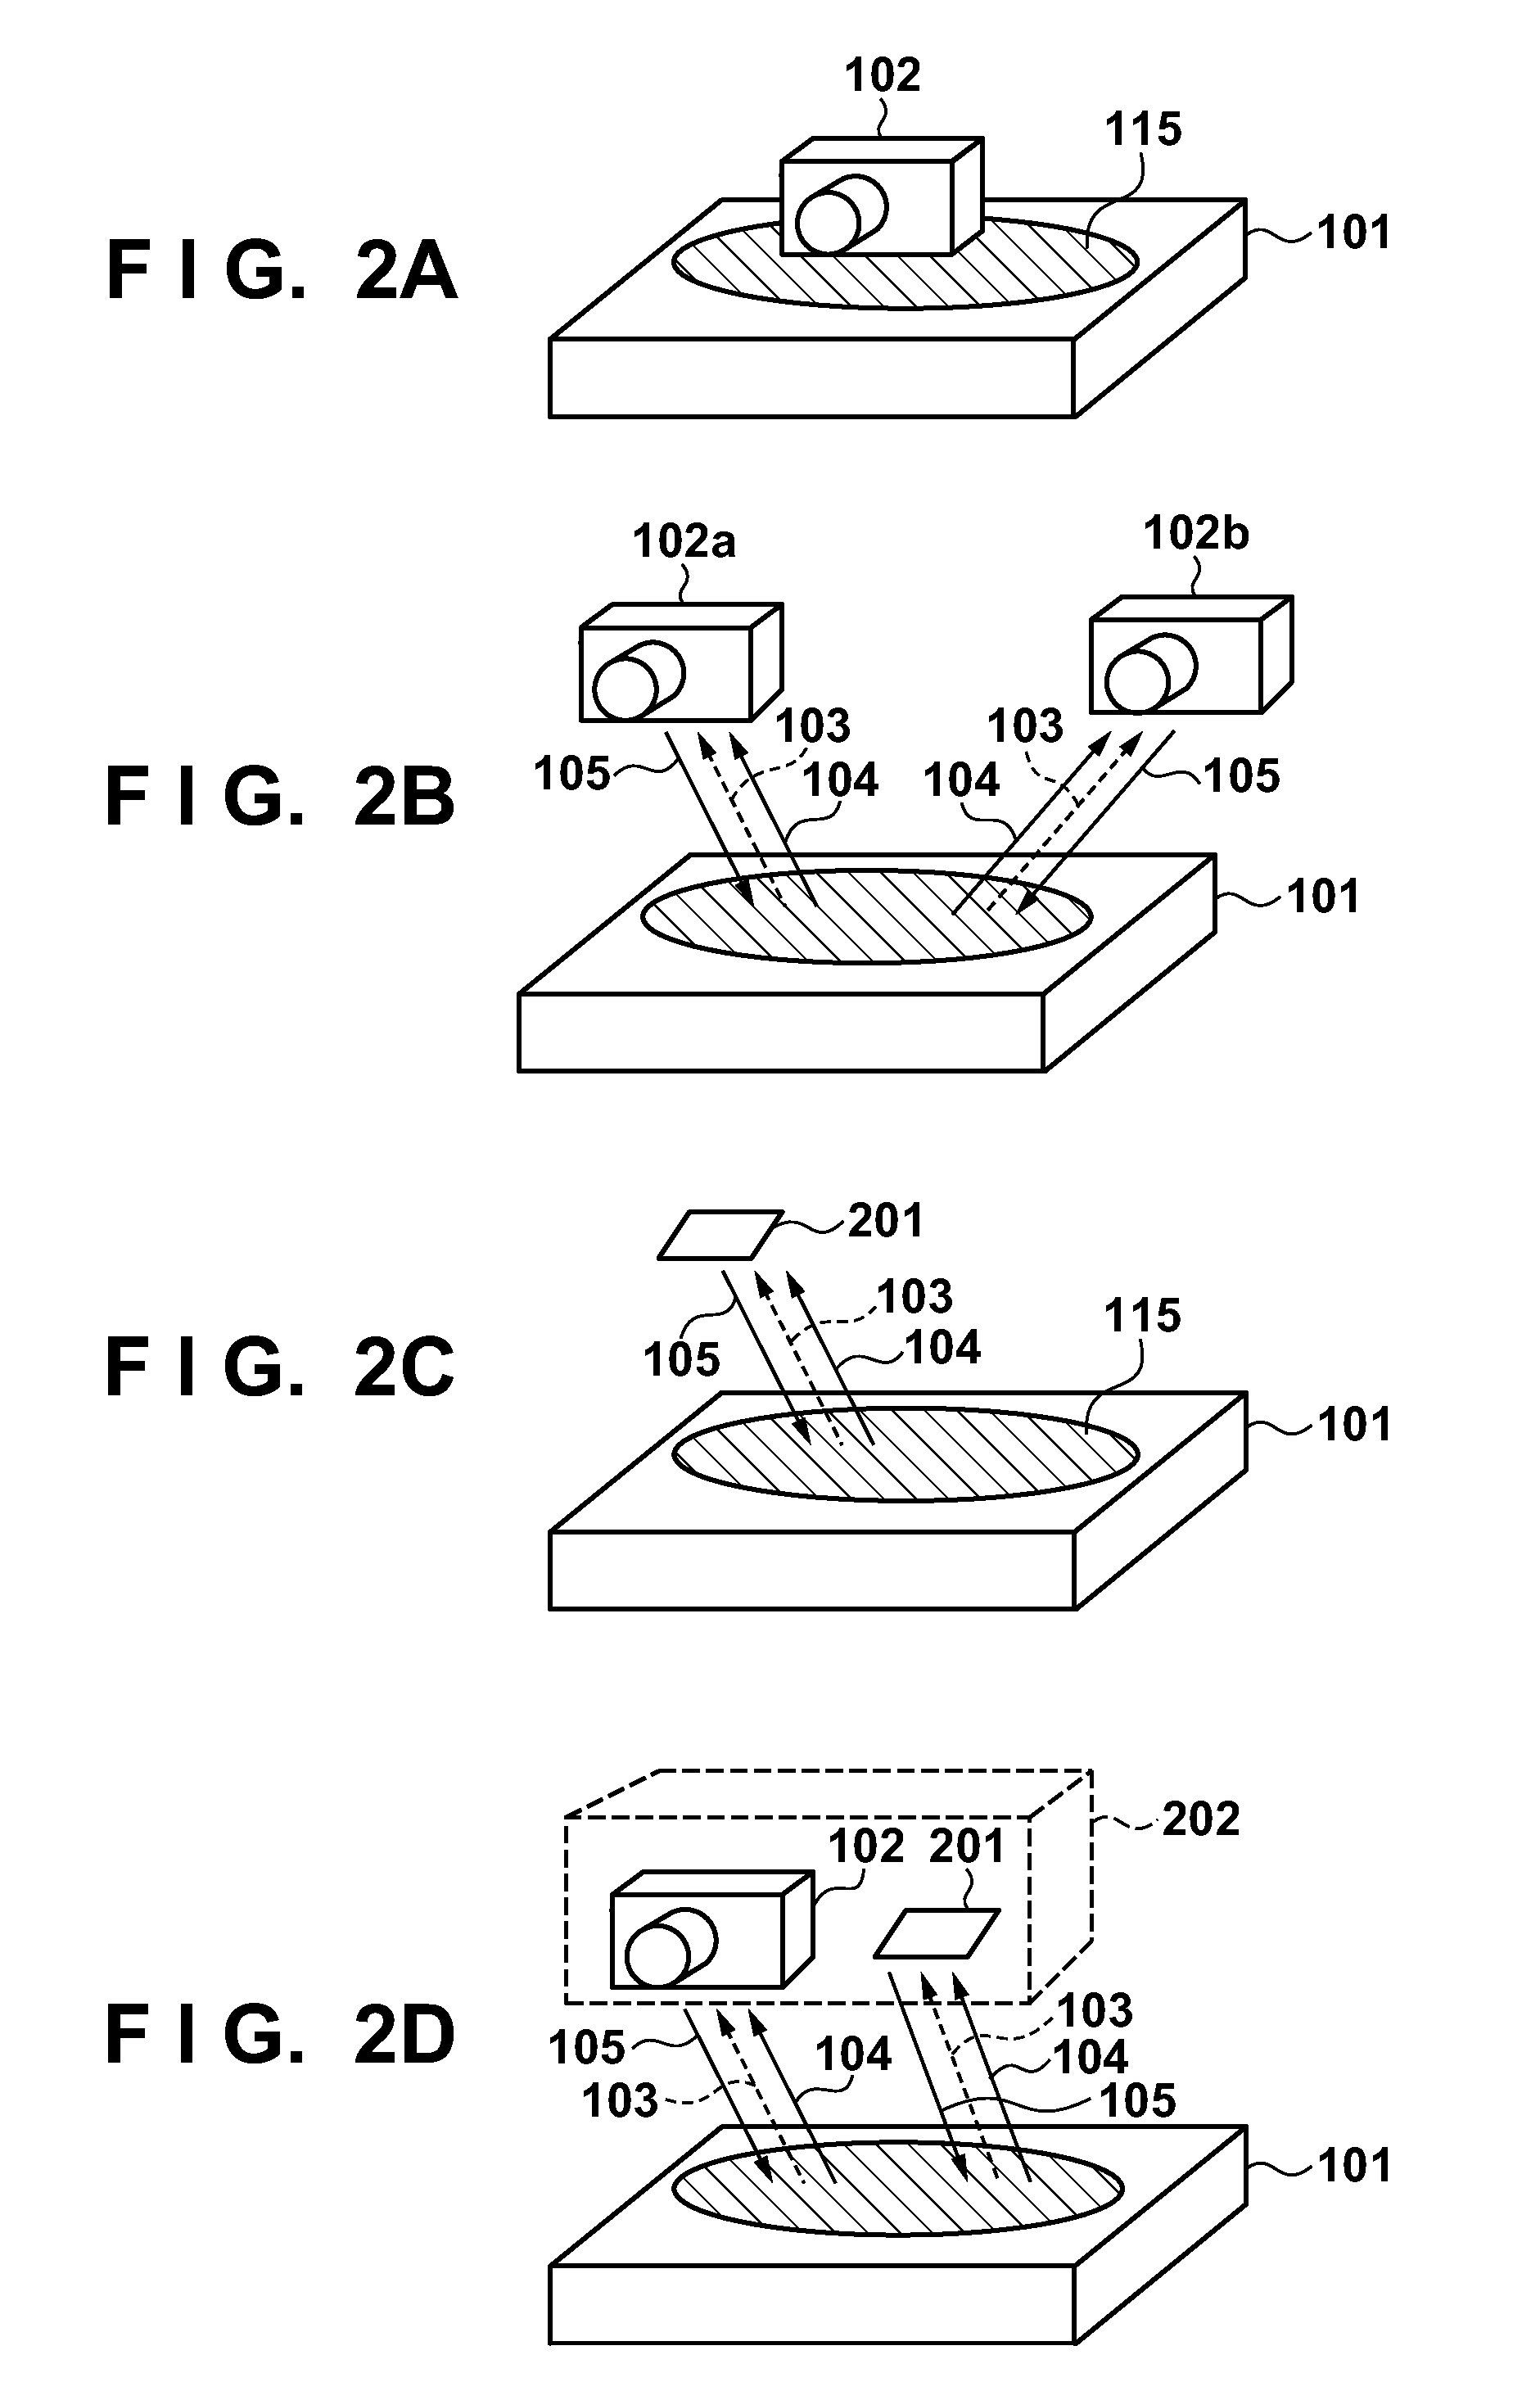 Power supply apparatus, control method thereof, and power supply system